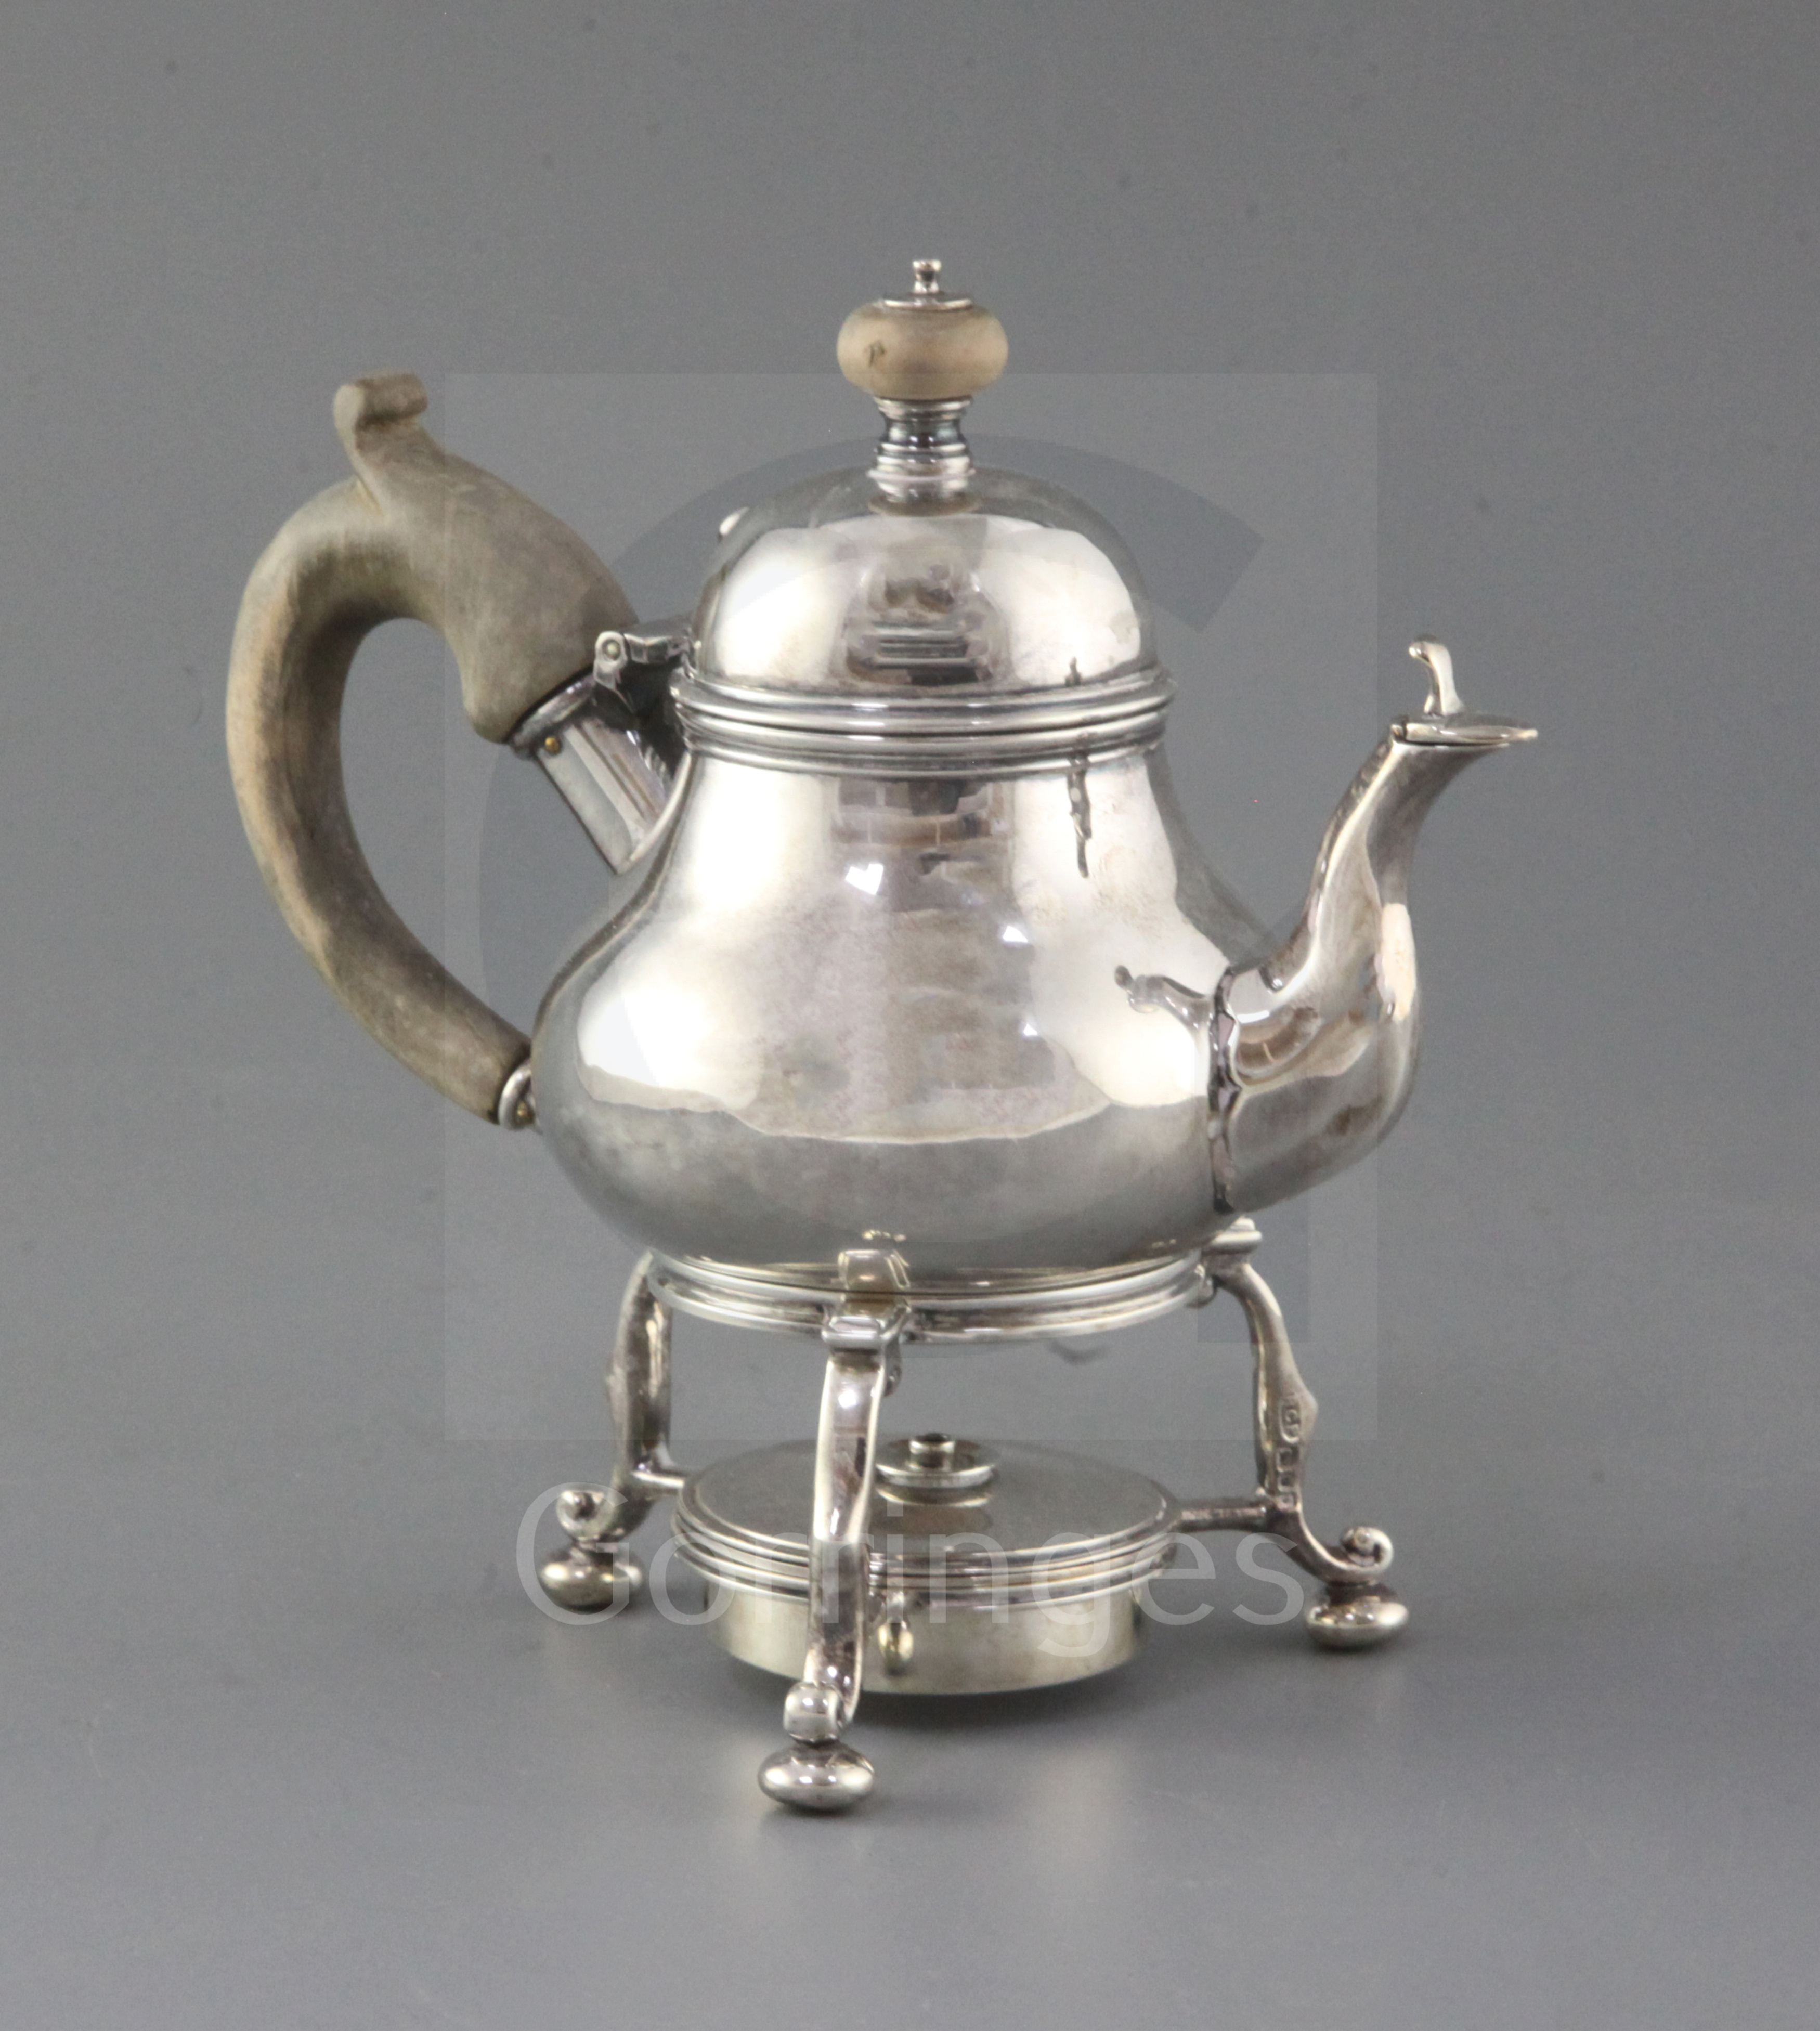 A 1980's Queen Anne style silver spirit kettle, on tripod stand with burner, by Rodney C. Pettit, of